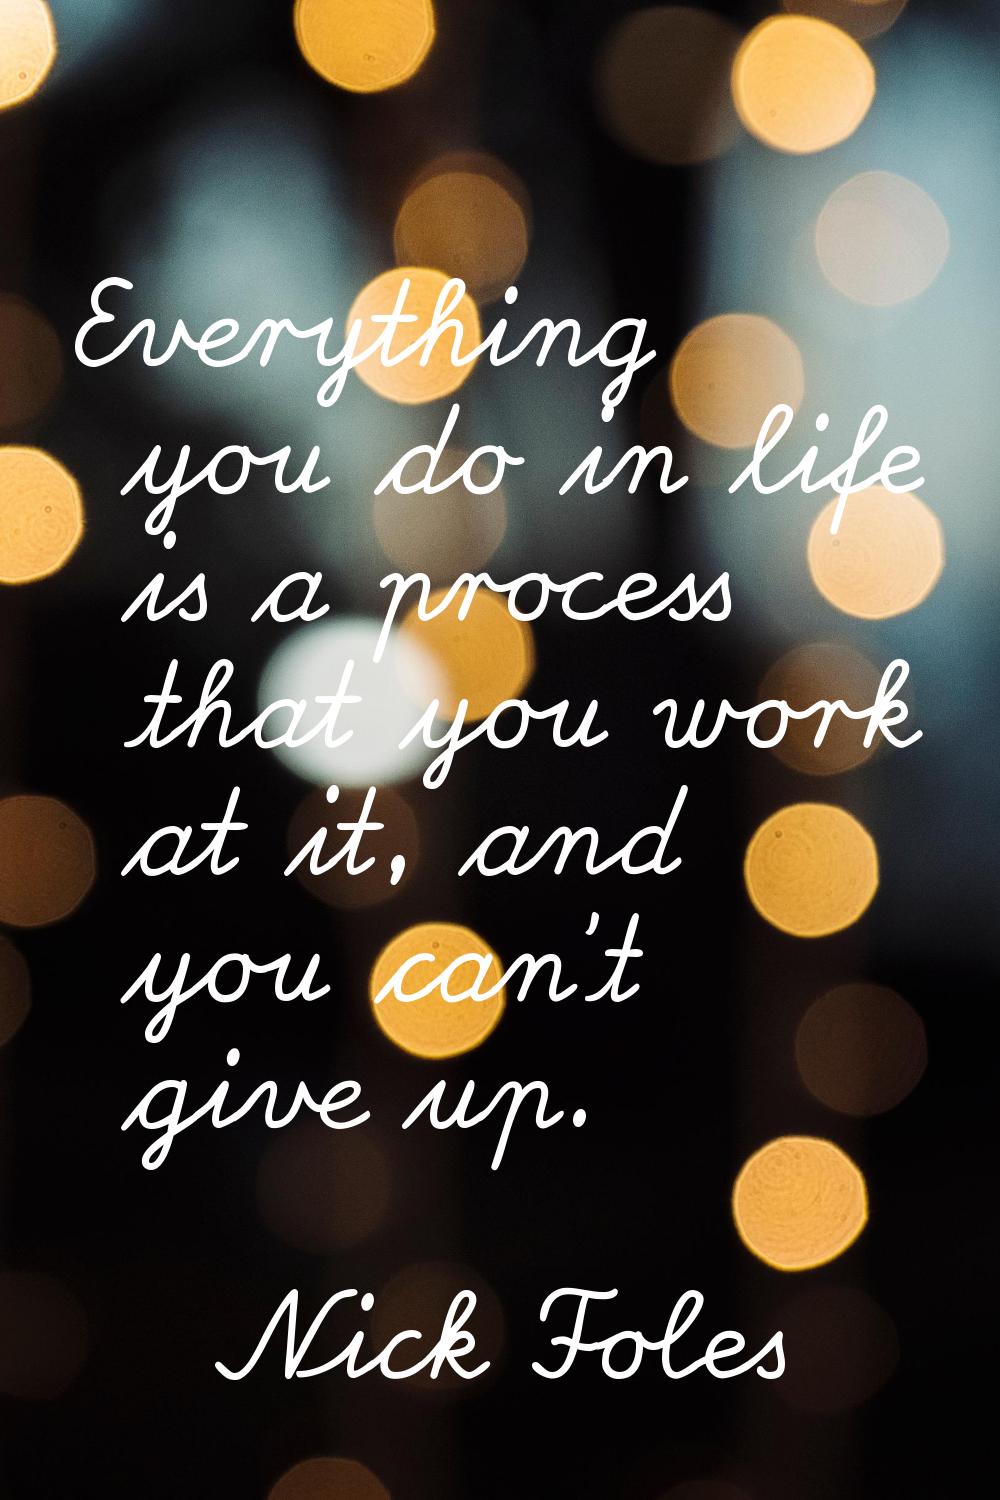 Everything you do in life is a process that you work at it, and you can't give up.